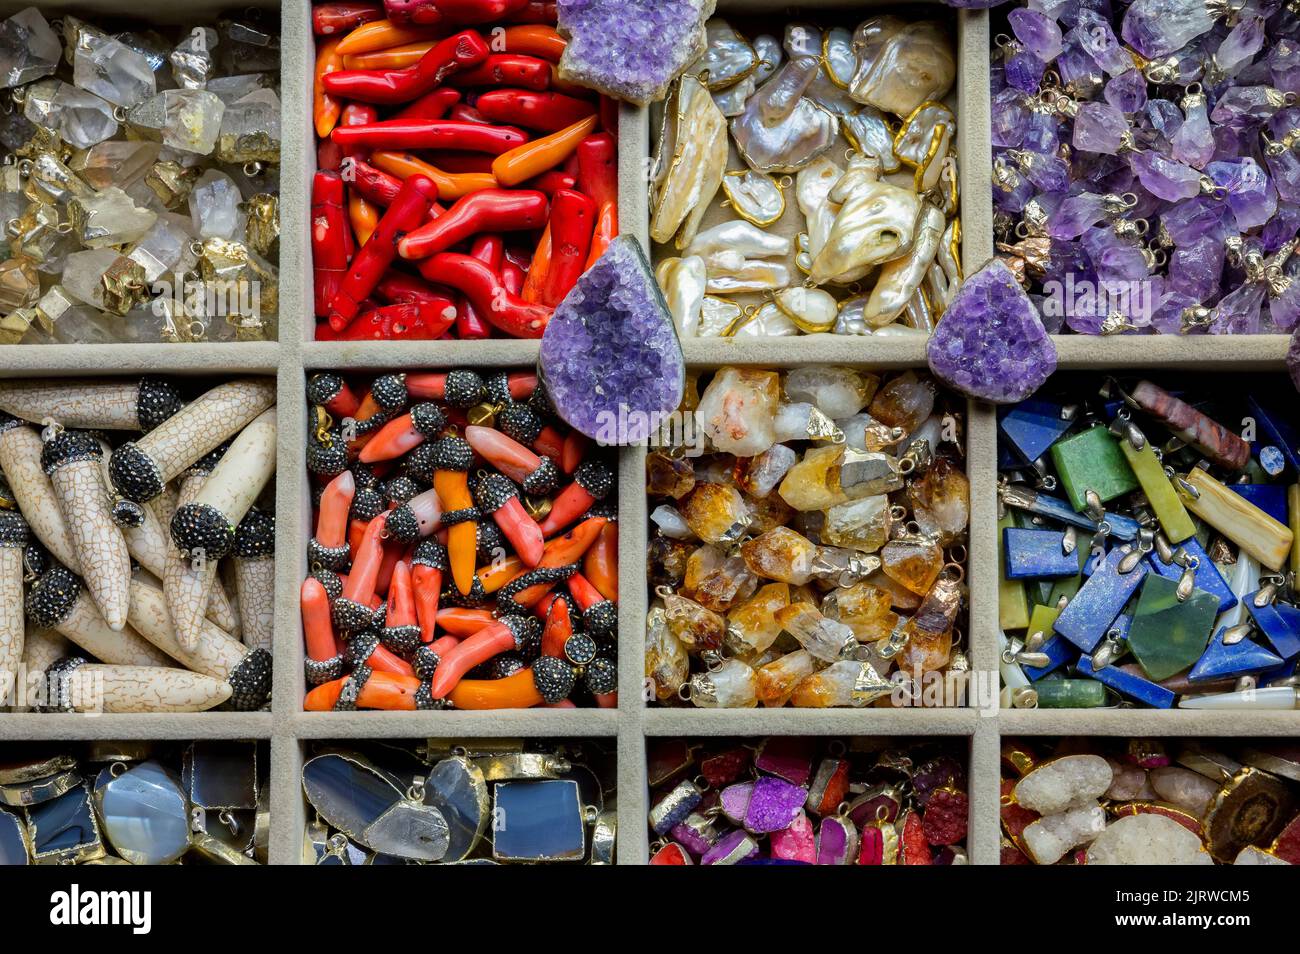 ISTANBUL TURKEY, January 2022. Different souvenirs made of semi-precious orornamental stones at the Grand Bazaar such as neck pendants and bracelet ch Stock Photo